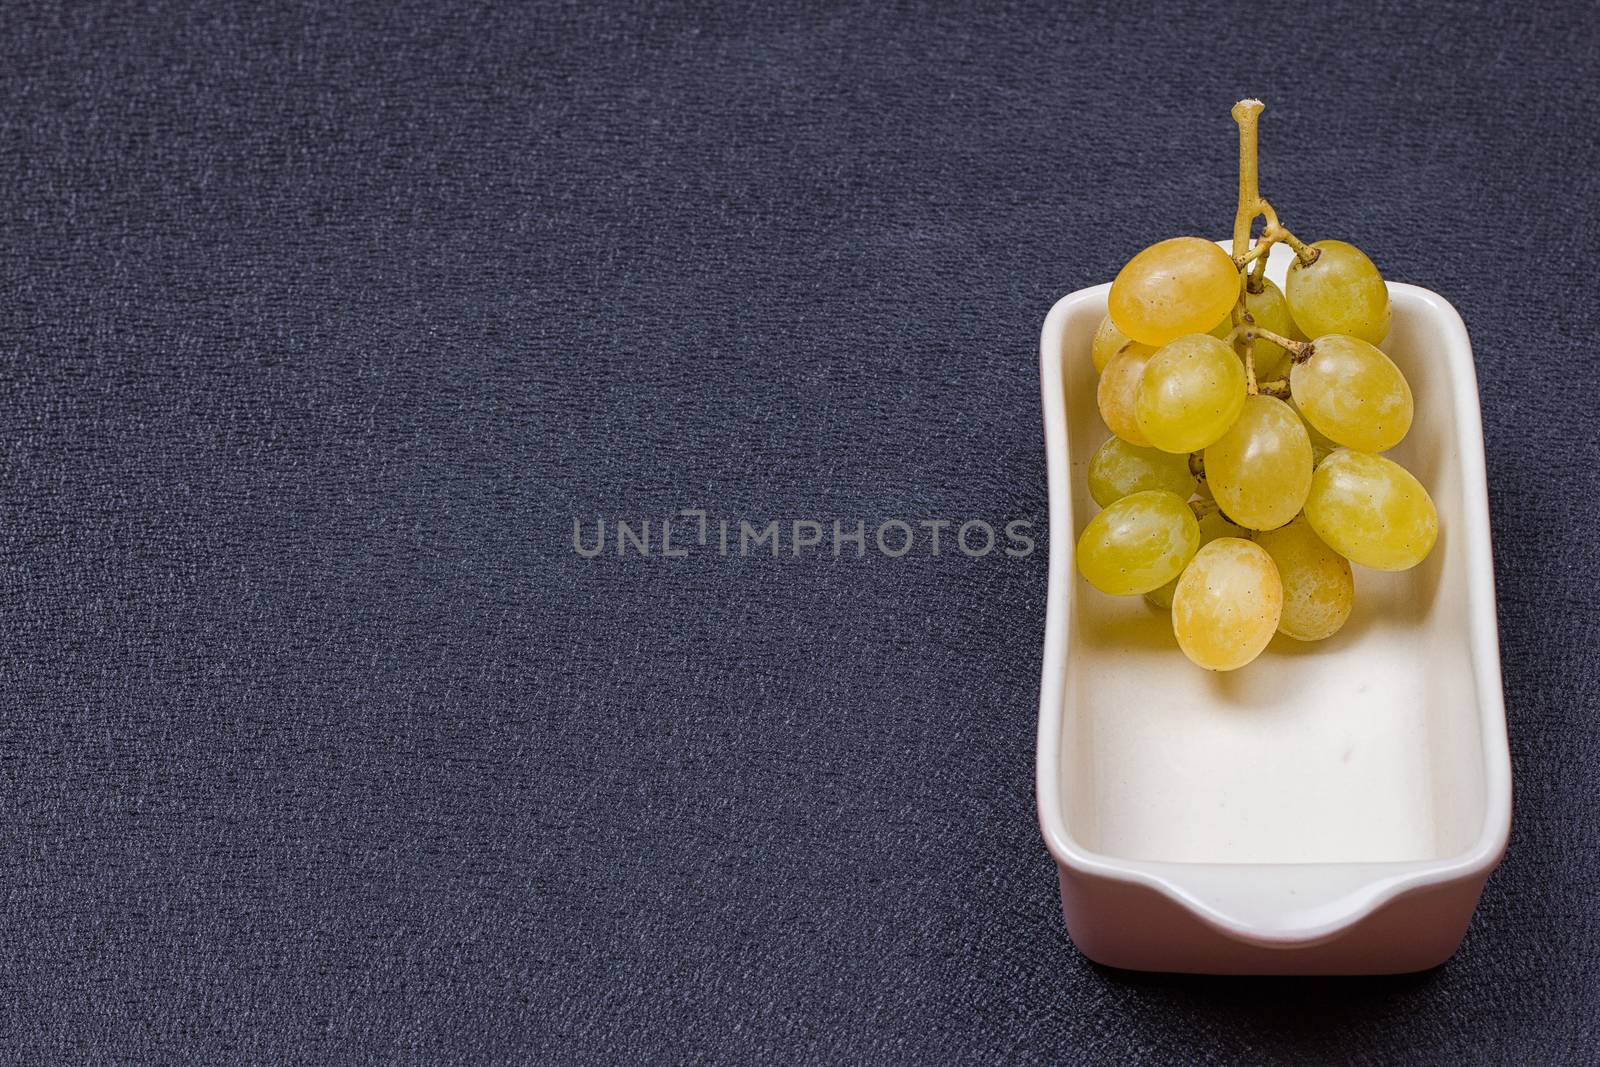 White grapes in a bowl on a black background by victosha